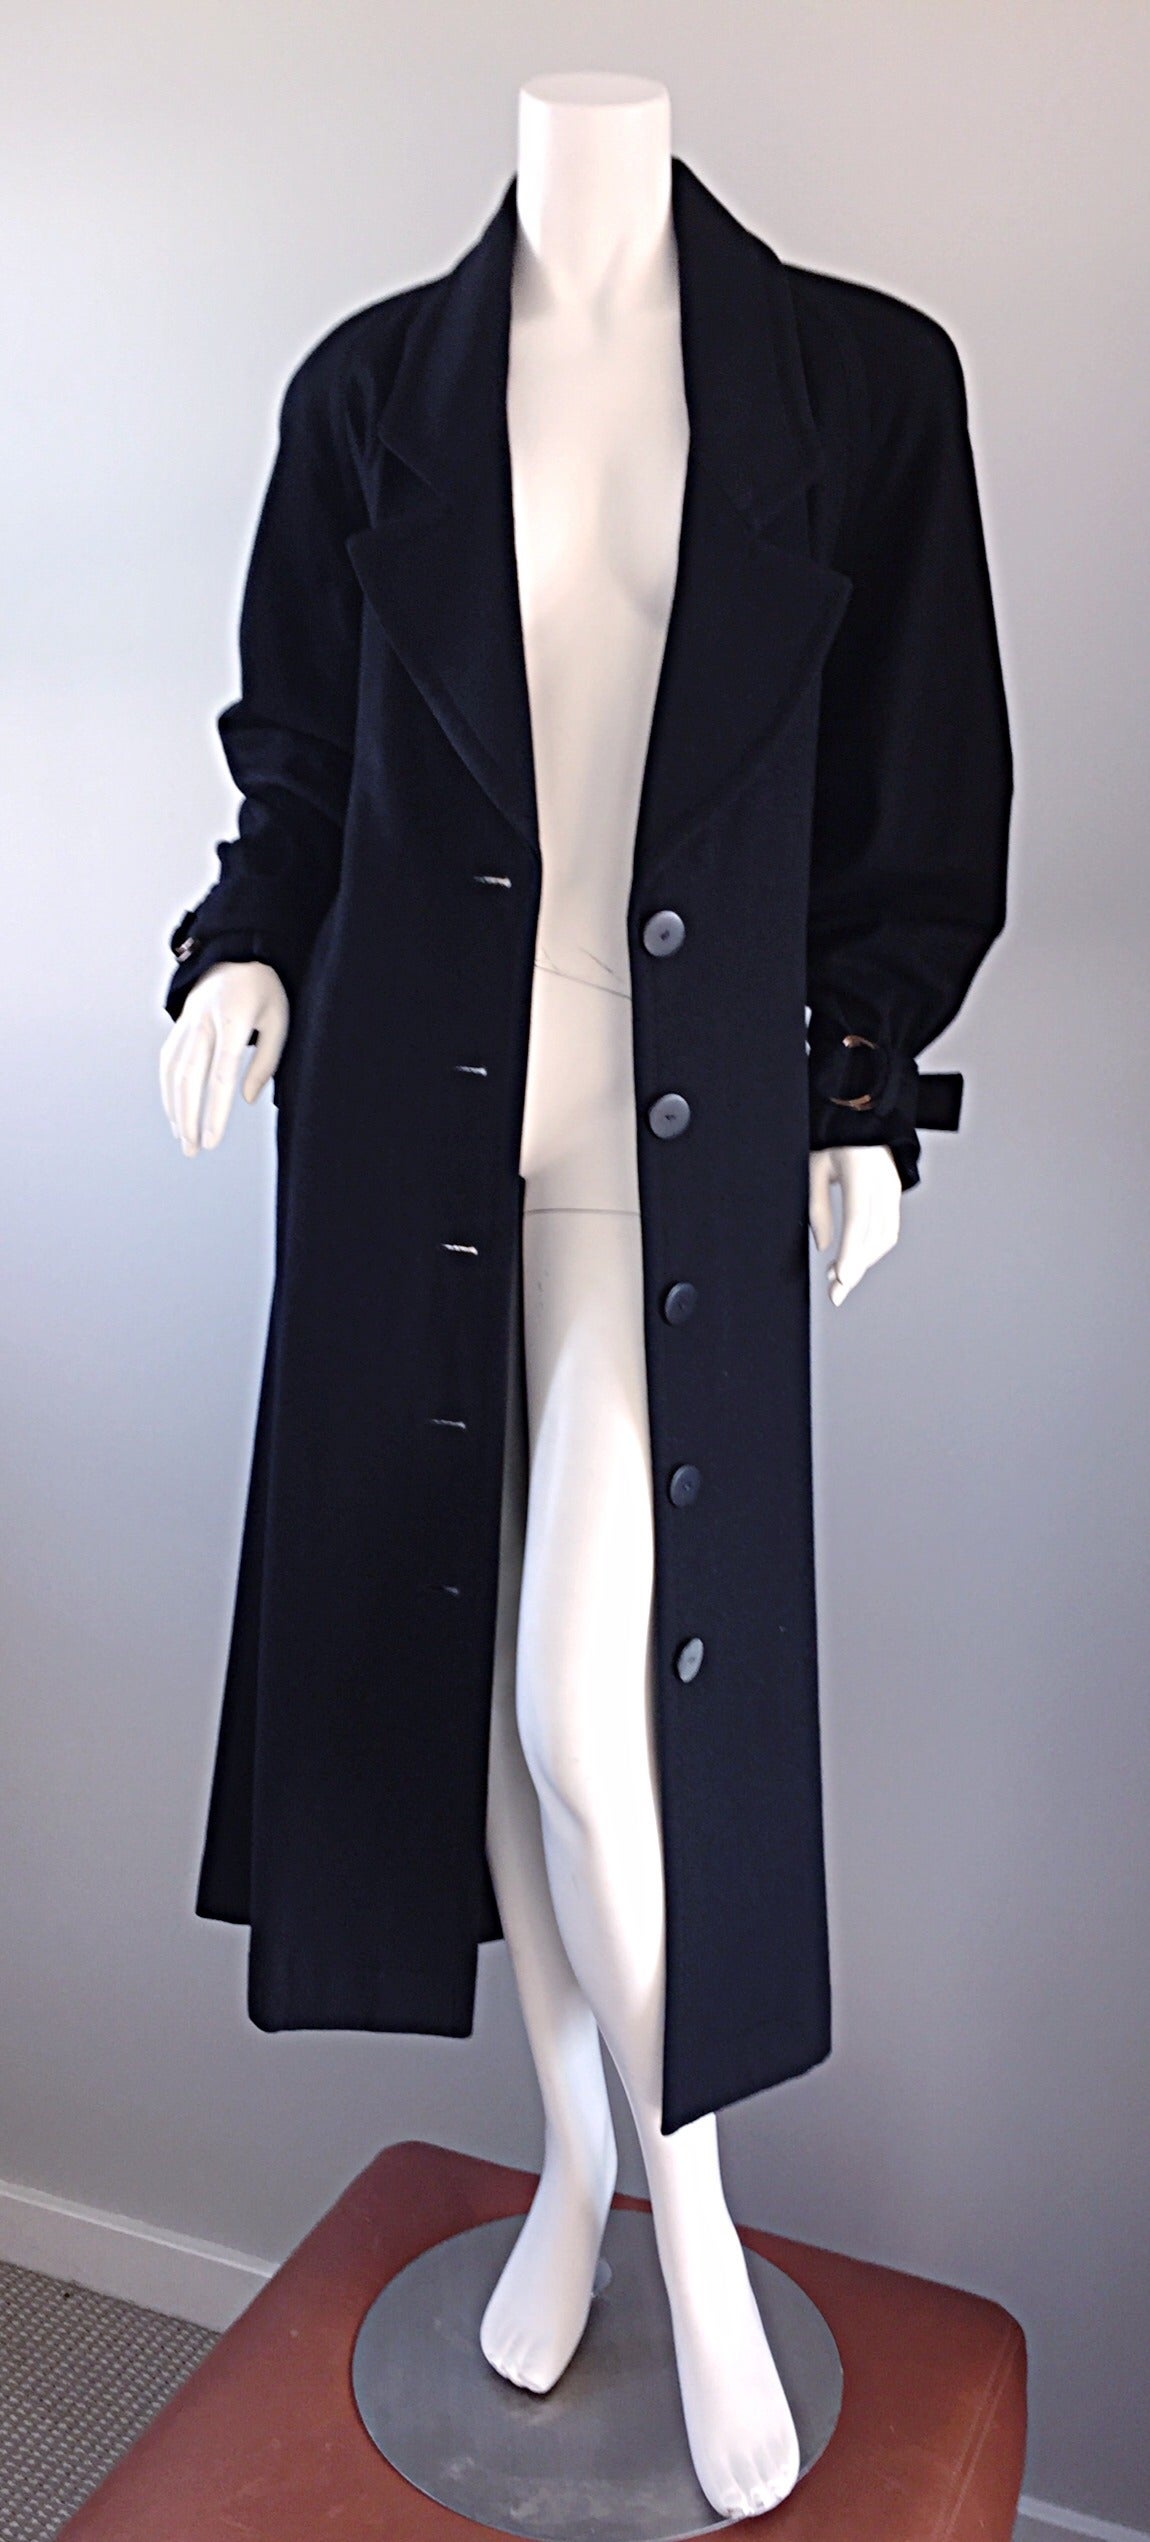 Vintage Chloe by Karl Lagerfeld Black Wool + Cashmere Avant Garde Spy Jacket In Excellent Condition For Sale In San Diego, CA